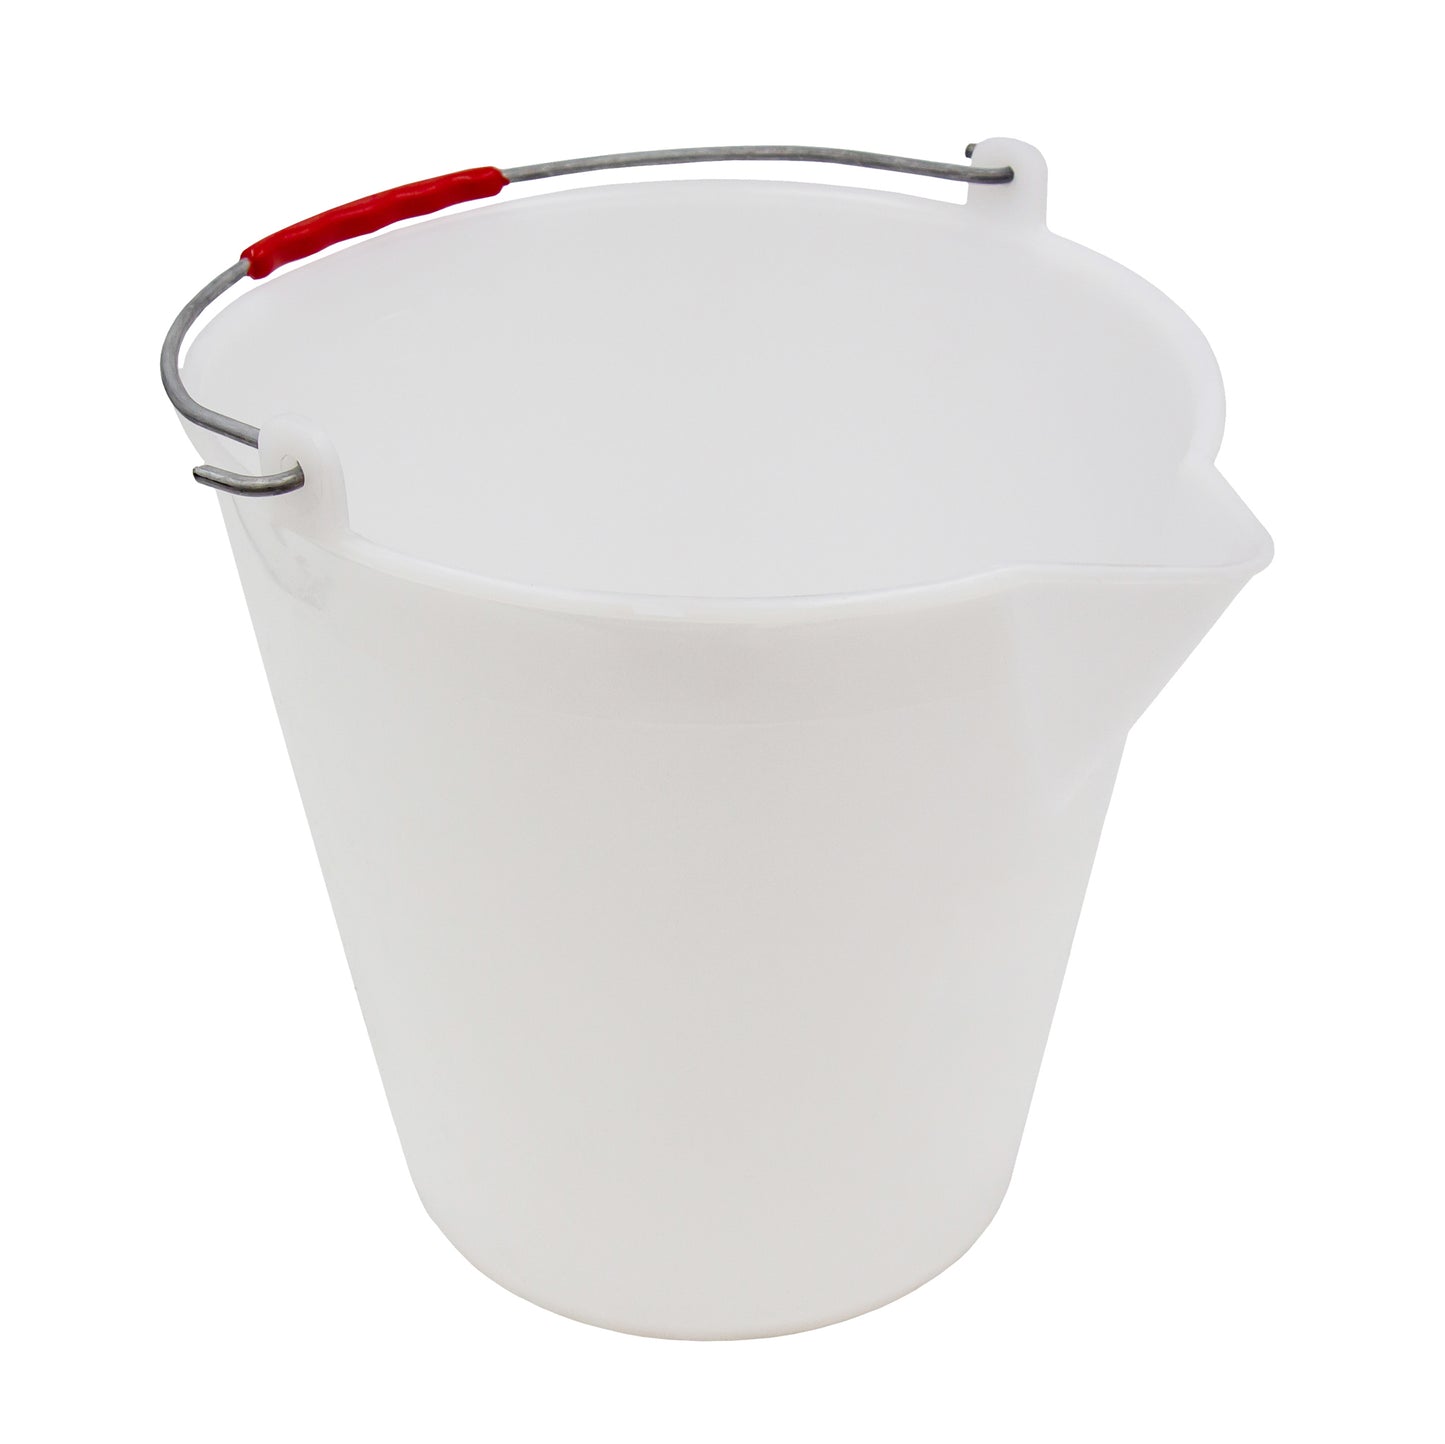 17 litre white plastic bucket with metal carry handle and easy pour spout. 